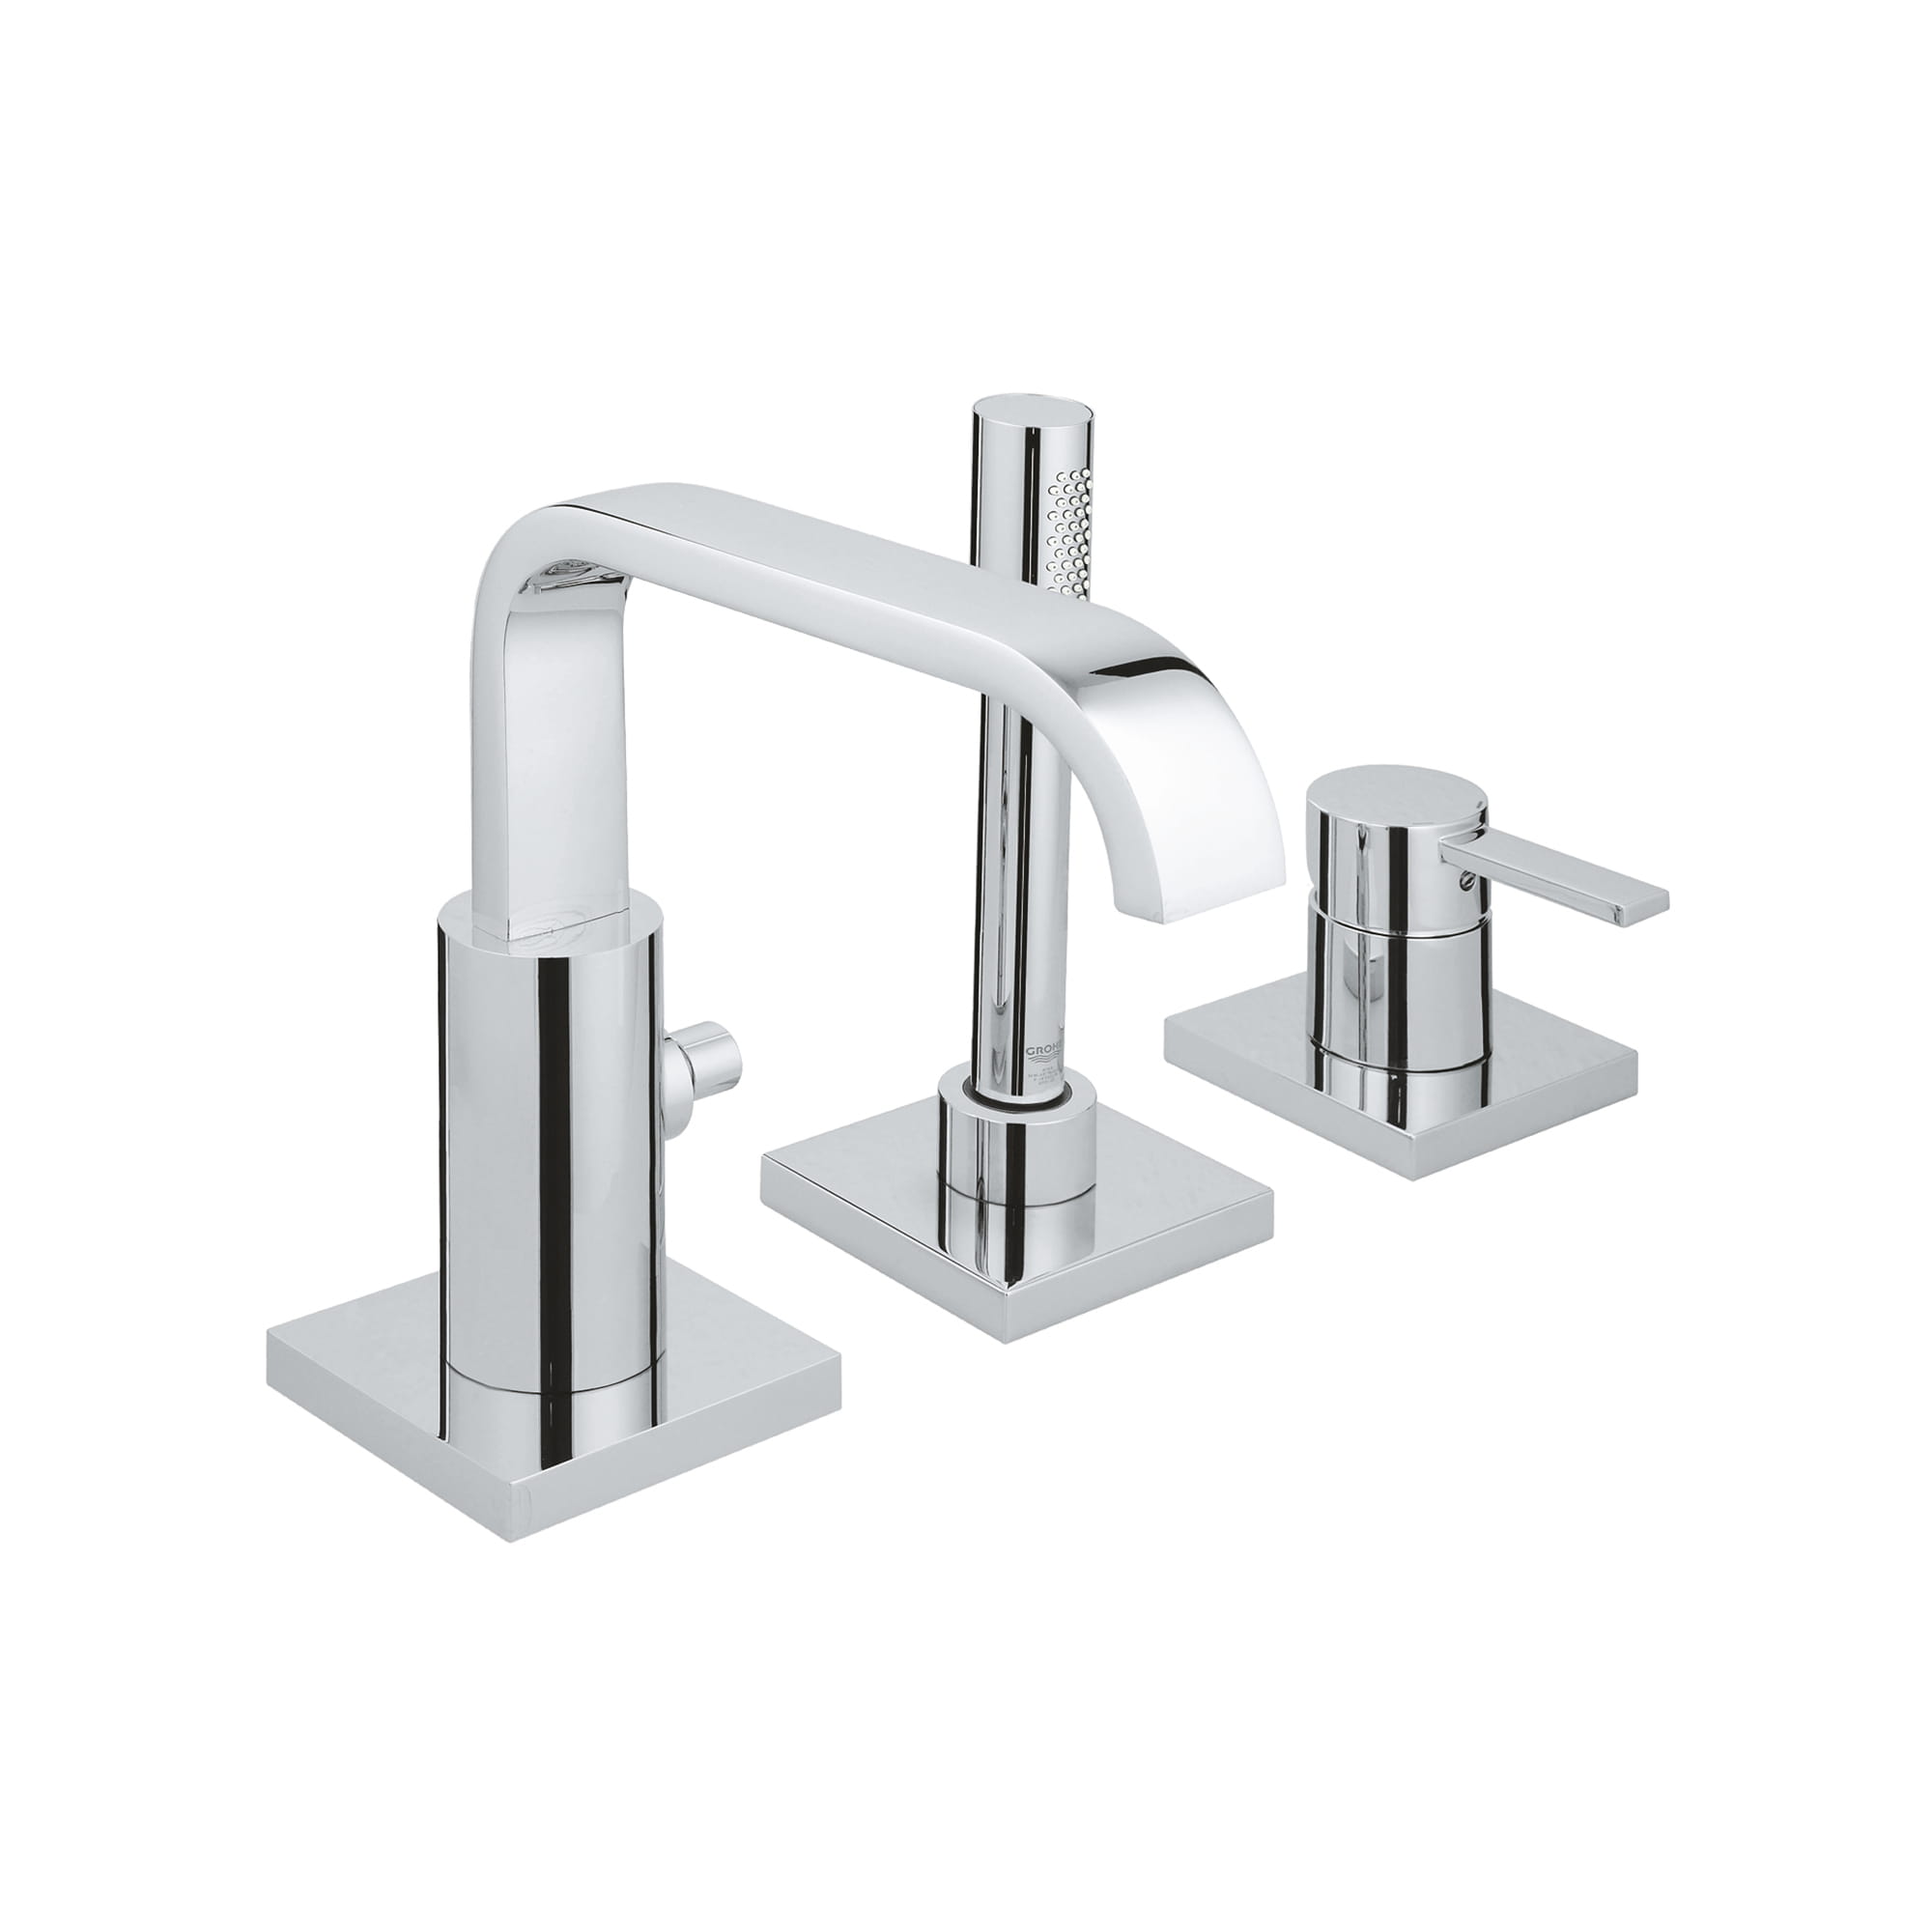 3-Hole Single-Handle Deck Mount Roman Tub Faucet with Hand Shower